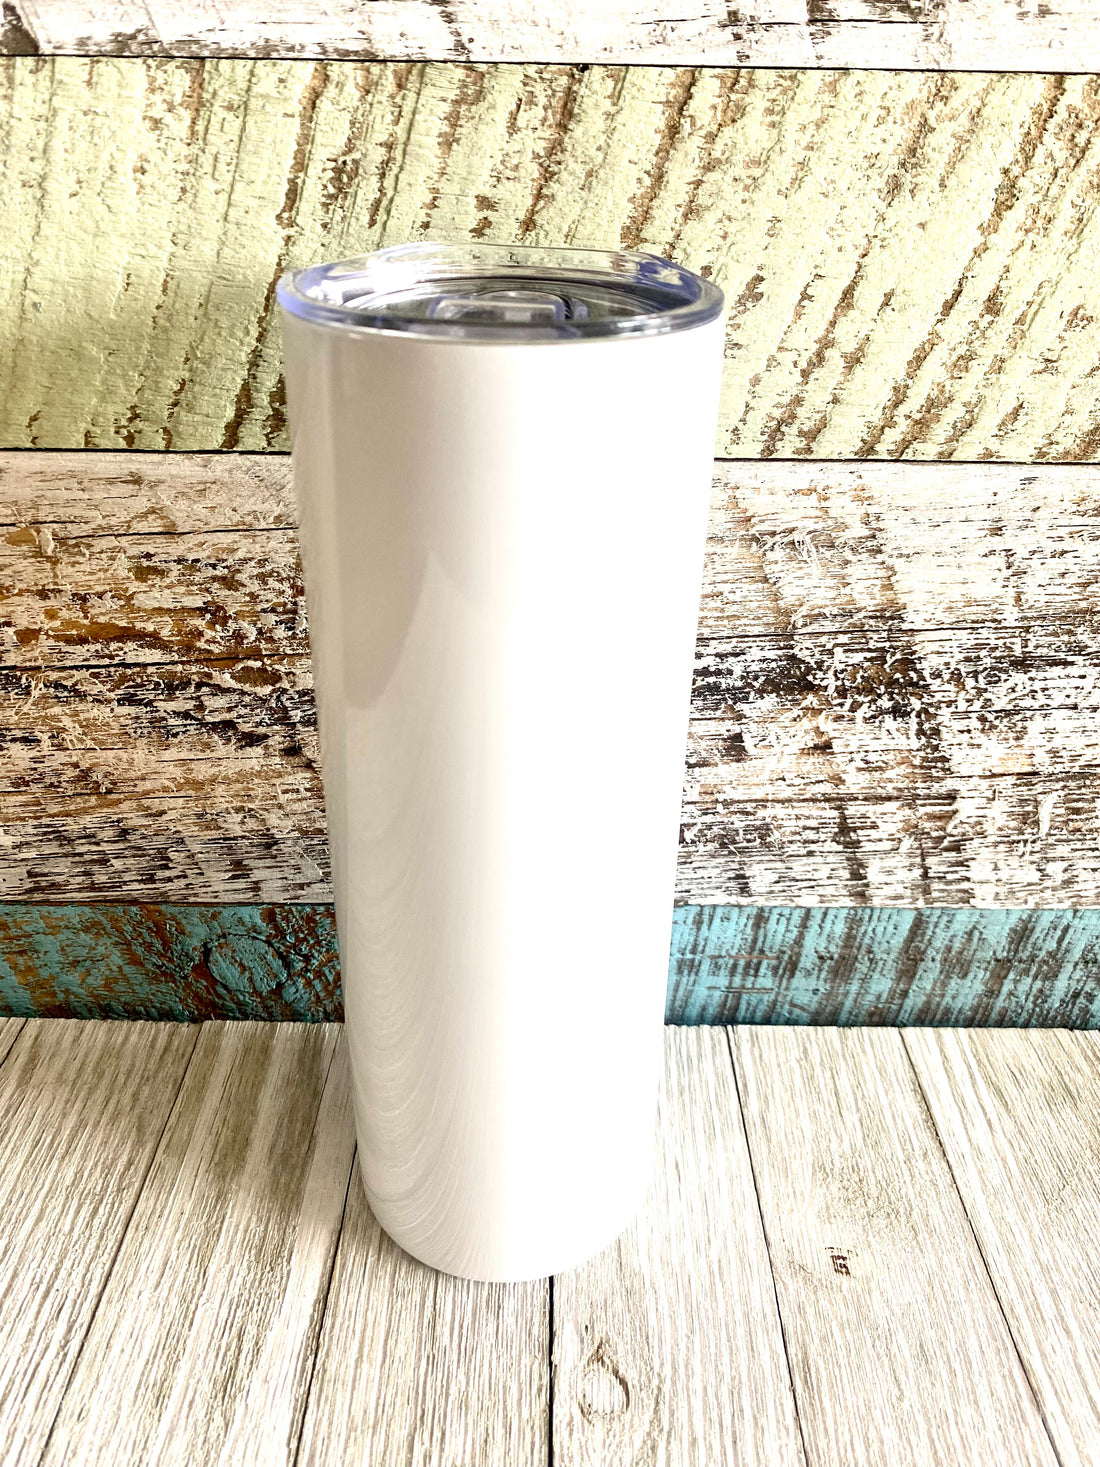 Sublimation Tumbler, Skinny Tumbler, 20oz Tumbler, White Tumbler, Custom Drinkware, Personalized Tumbler, Thermal Insulated Cup, Sublimation Printing, Stainless Steel Tumbler, Customizable Drink Holder, Beverage Container,